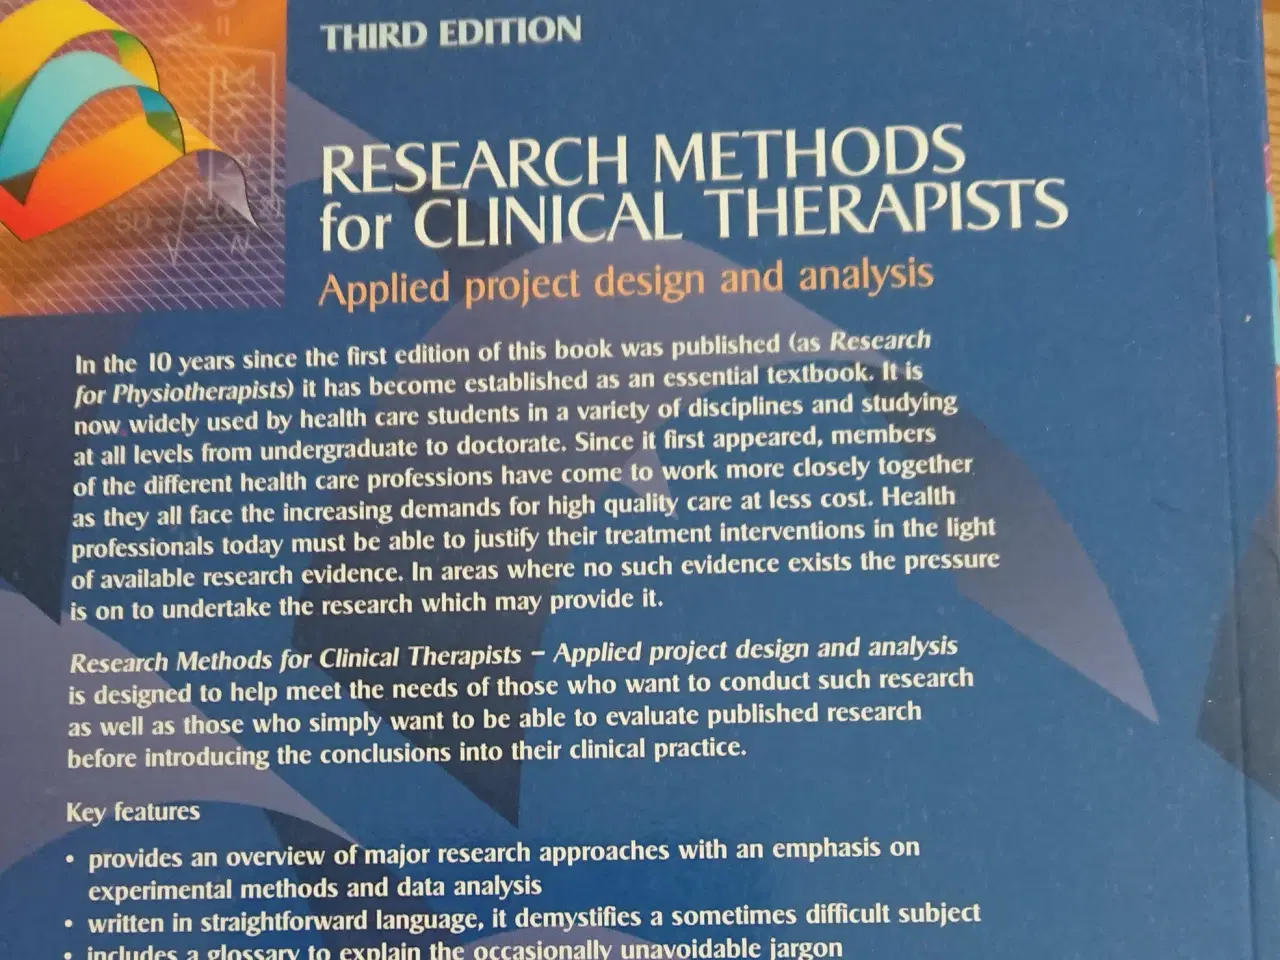 Billede 2 - Research methods for clinical therapists